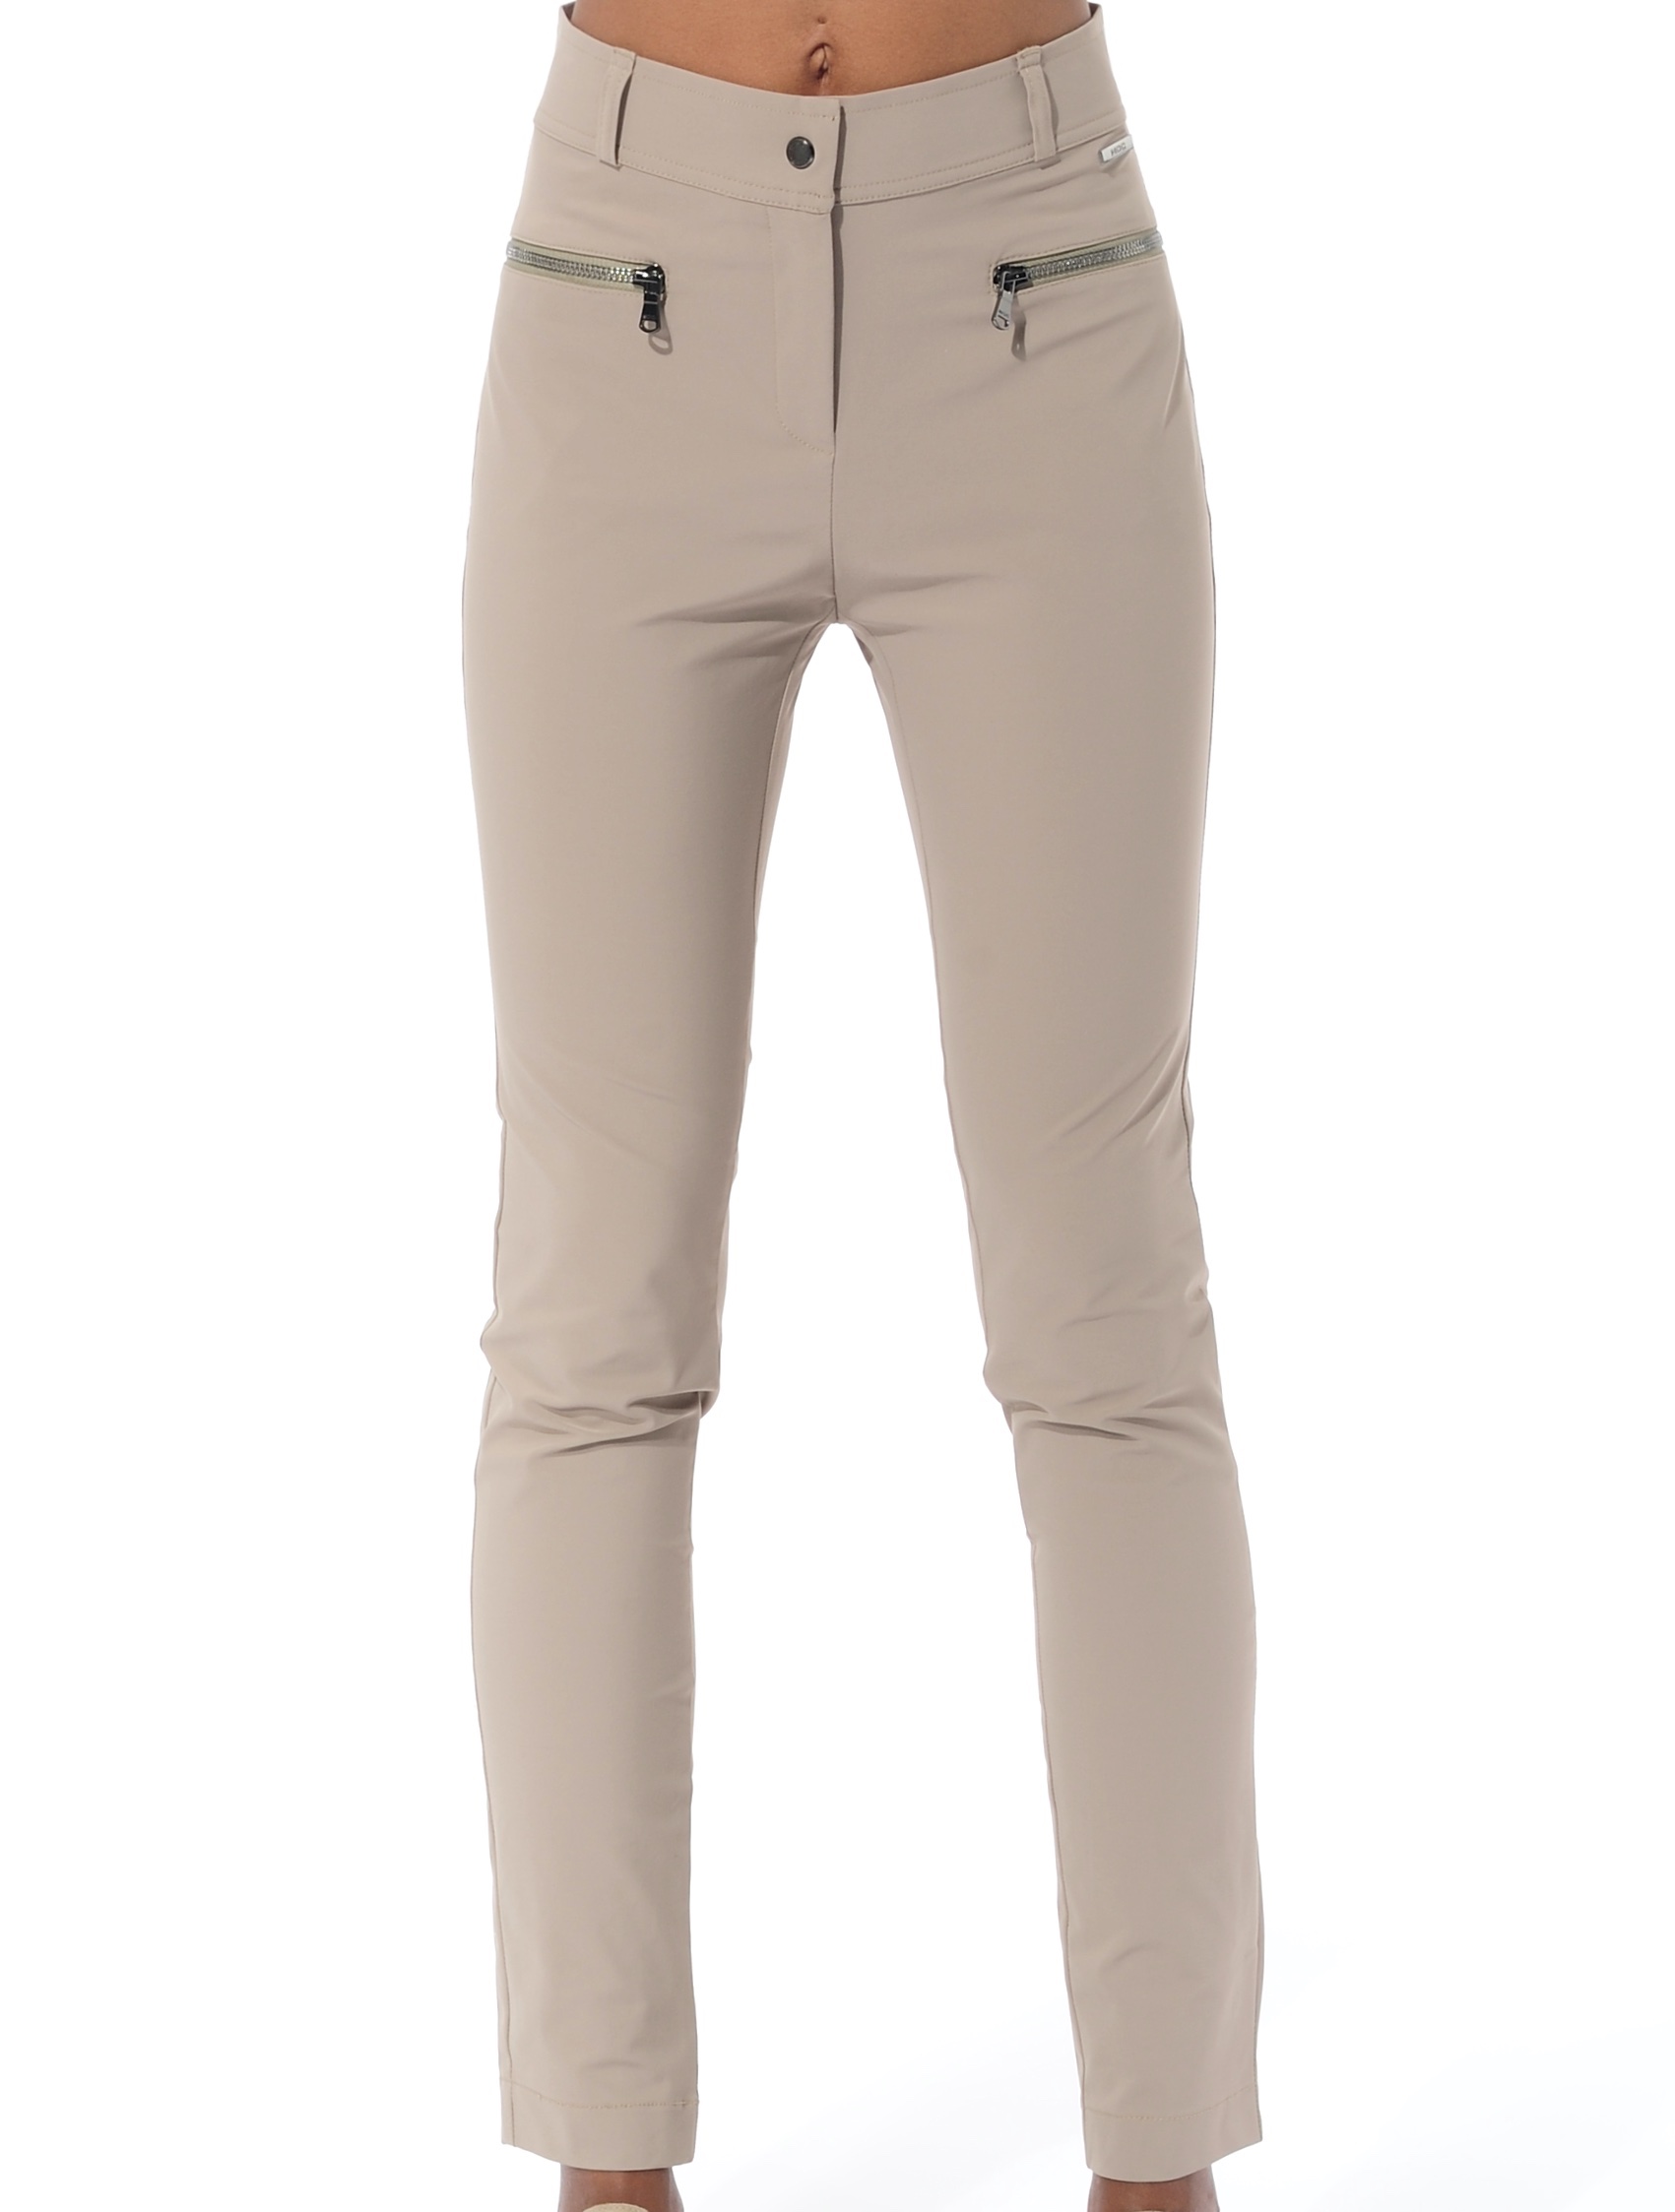 4way stretch jeggings taupe 